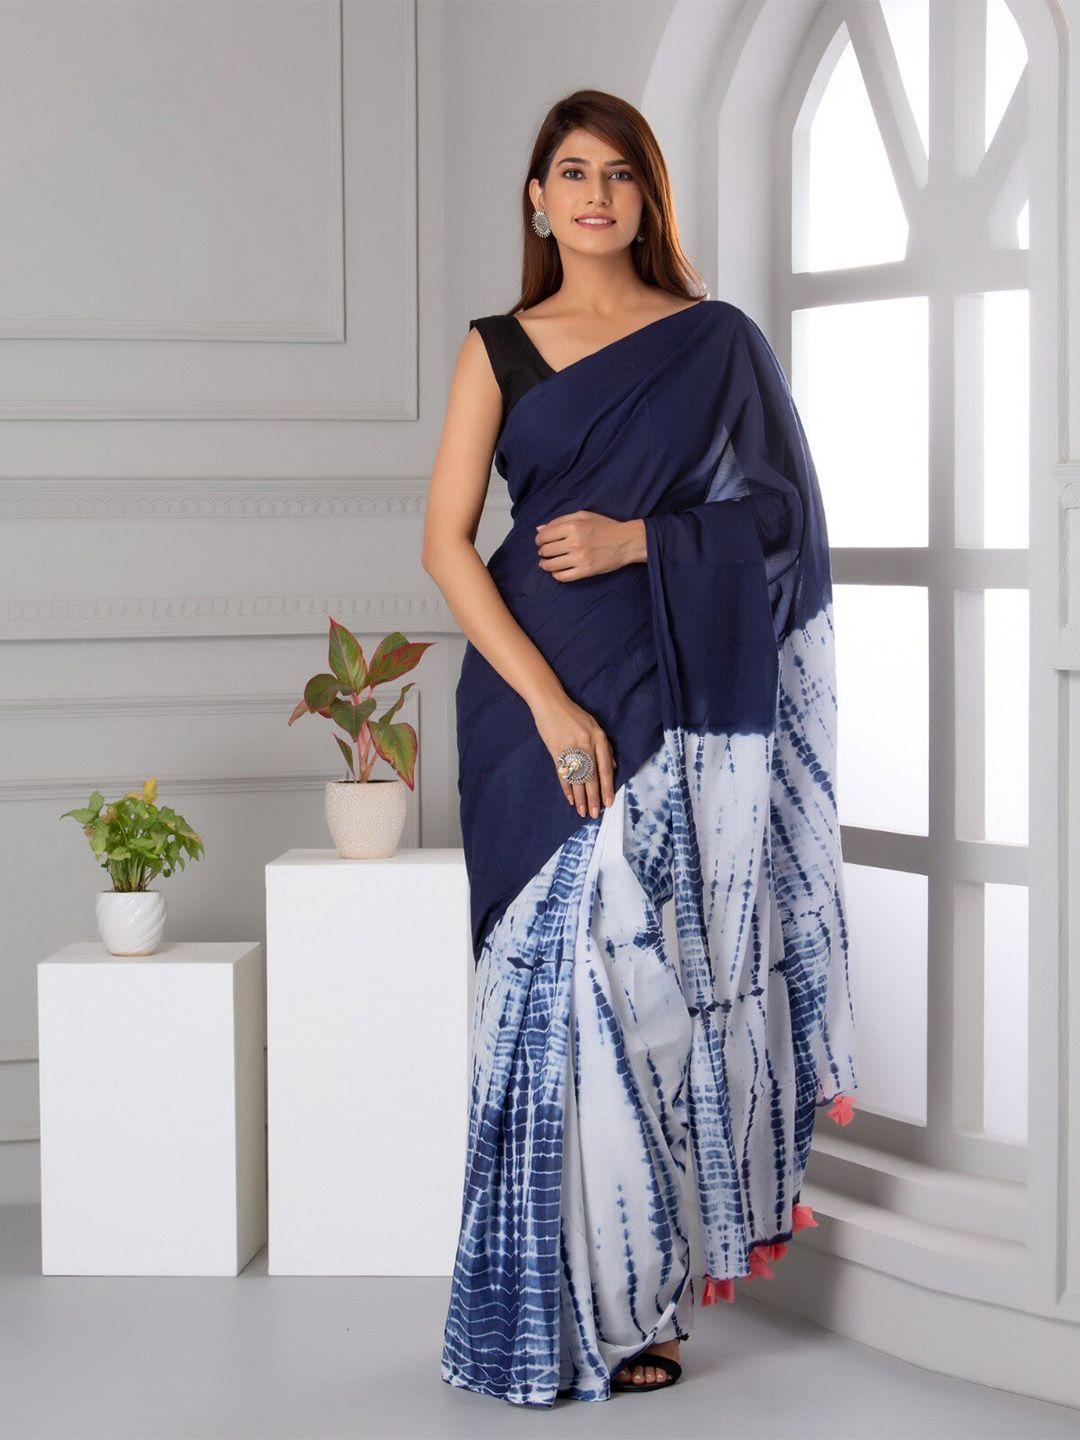 jalther tie and dye pure cotton block print saree